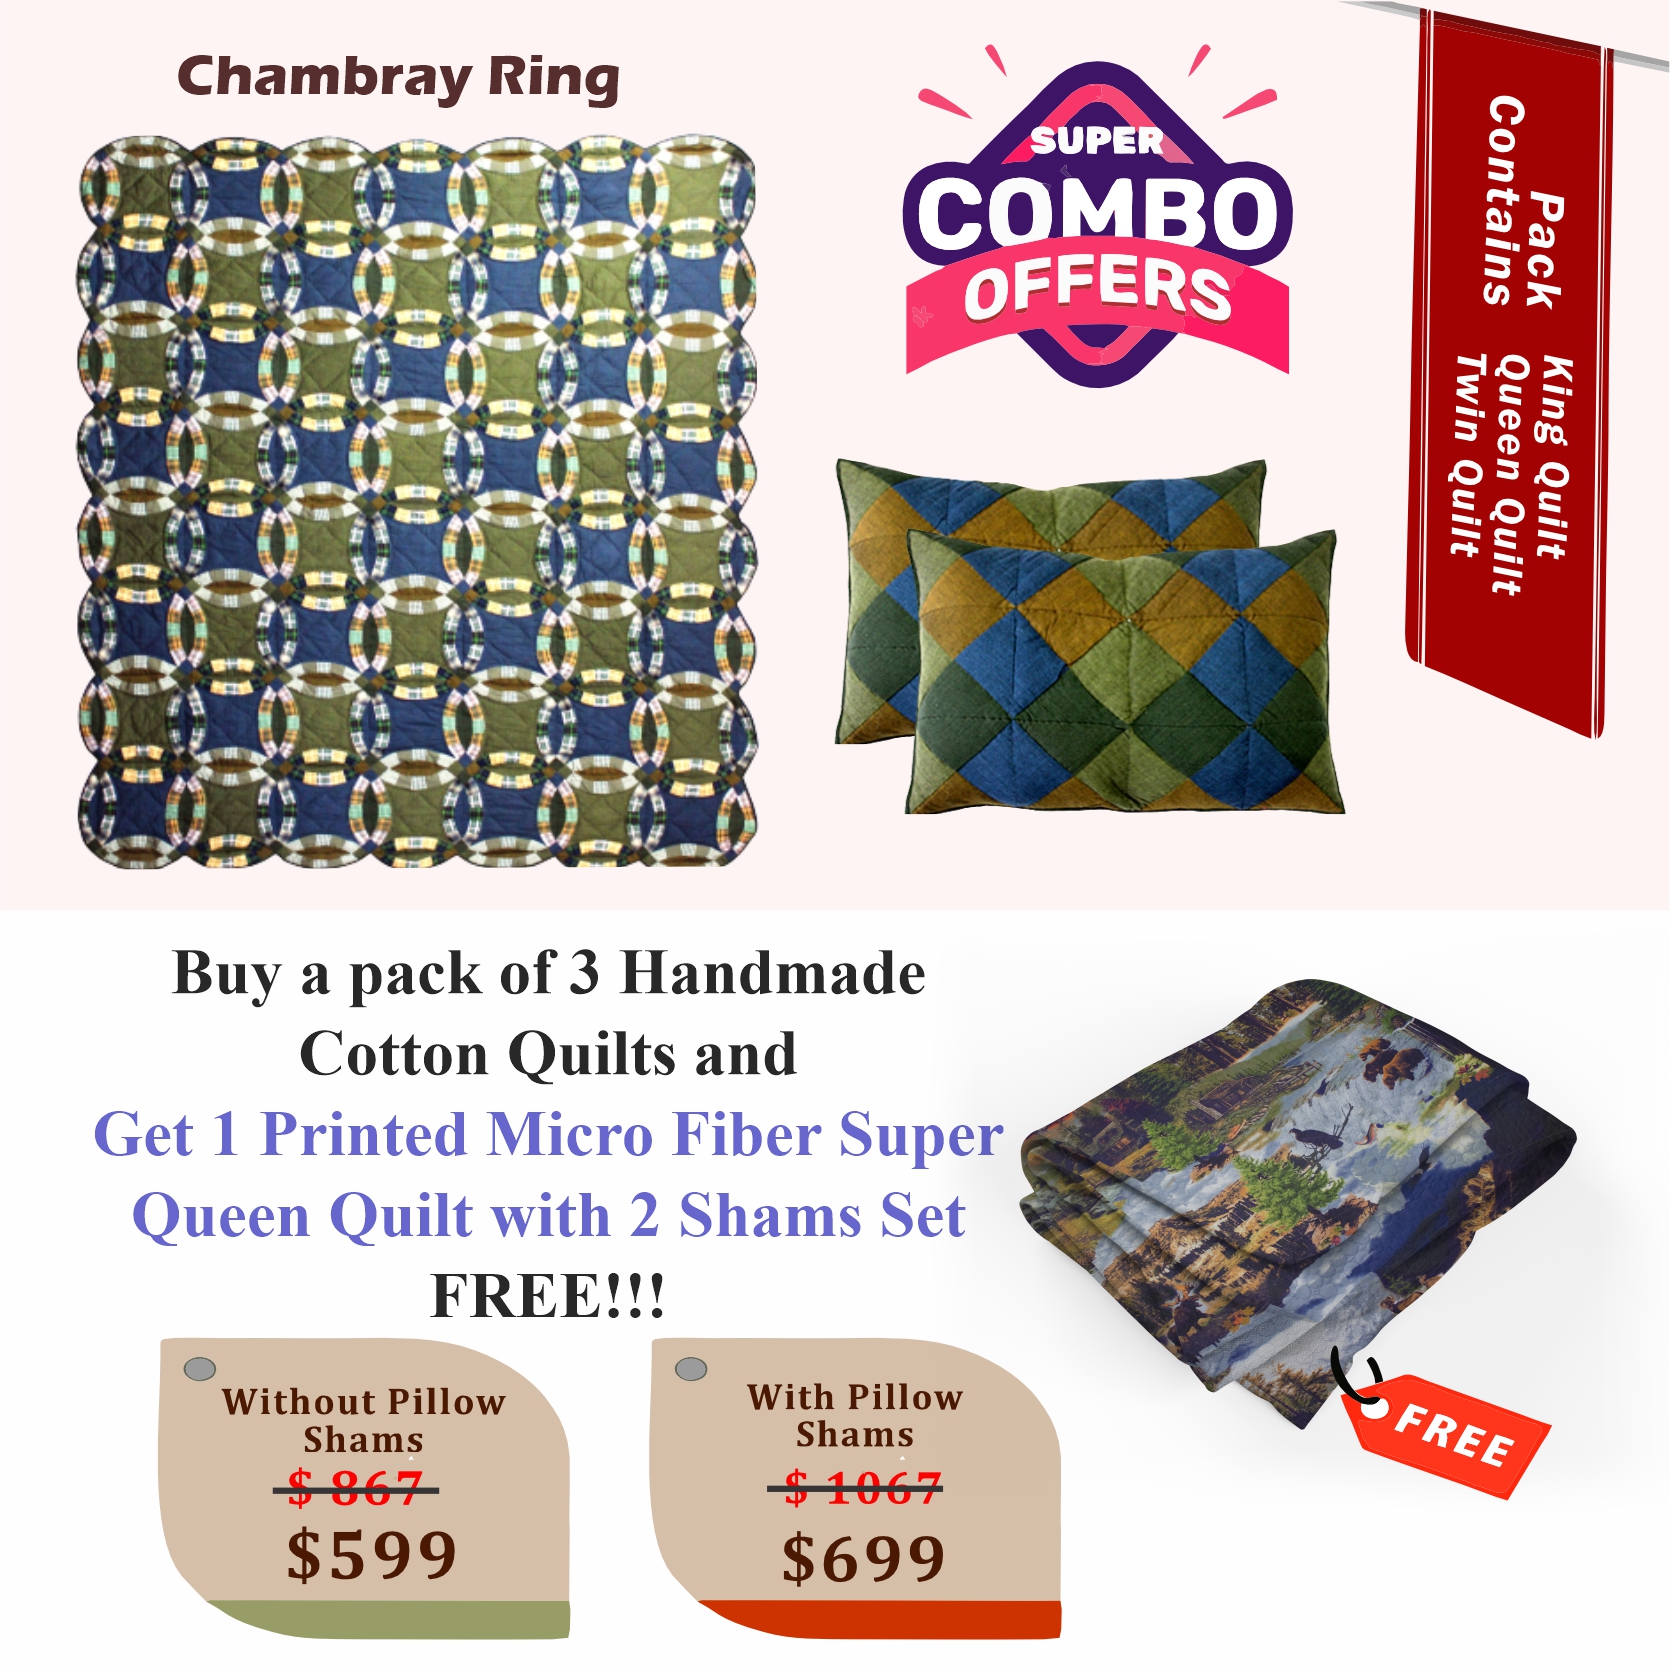 Chambray Whirl - Handmade Cotton quilts | Buy 3 cotton quilts and get 1 Printed Microfiber Super Queen Quilt with 2 Shams set FREE